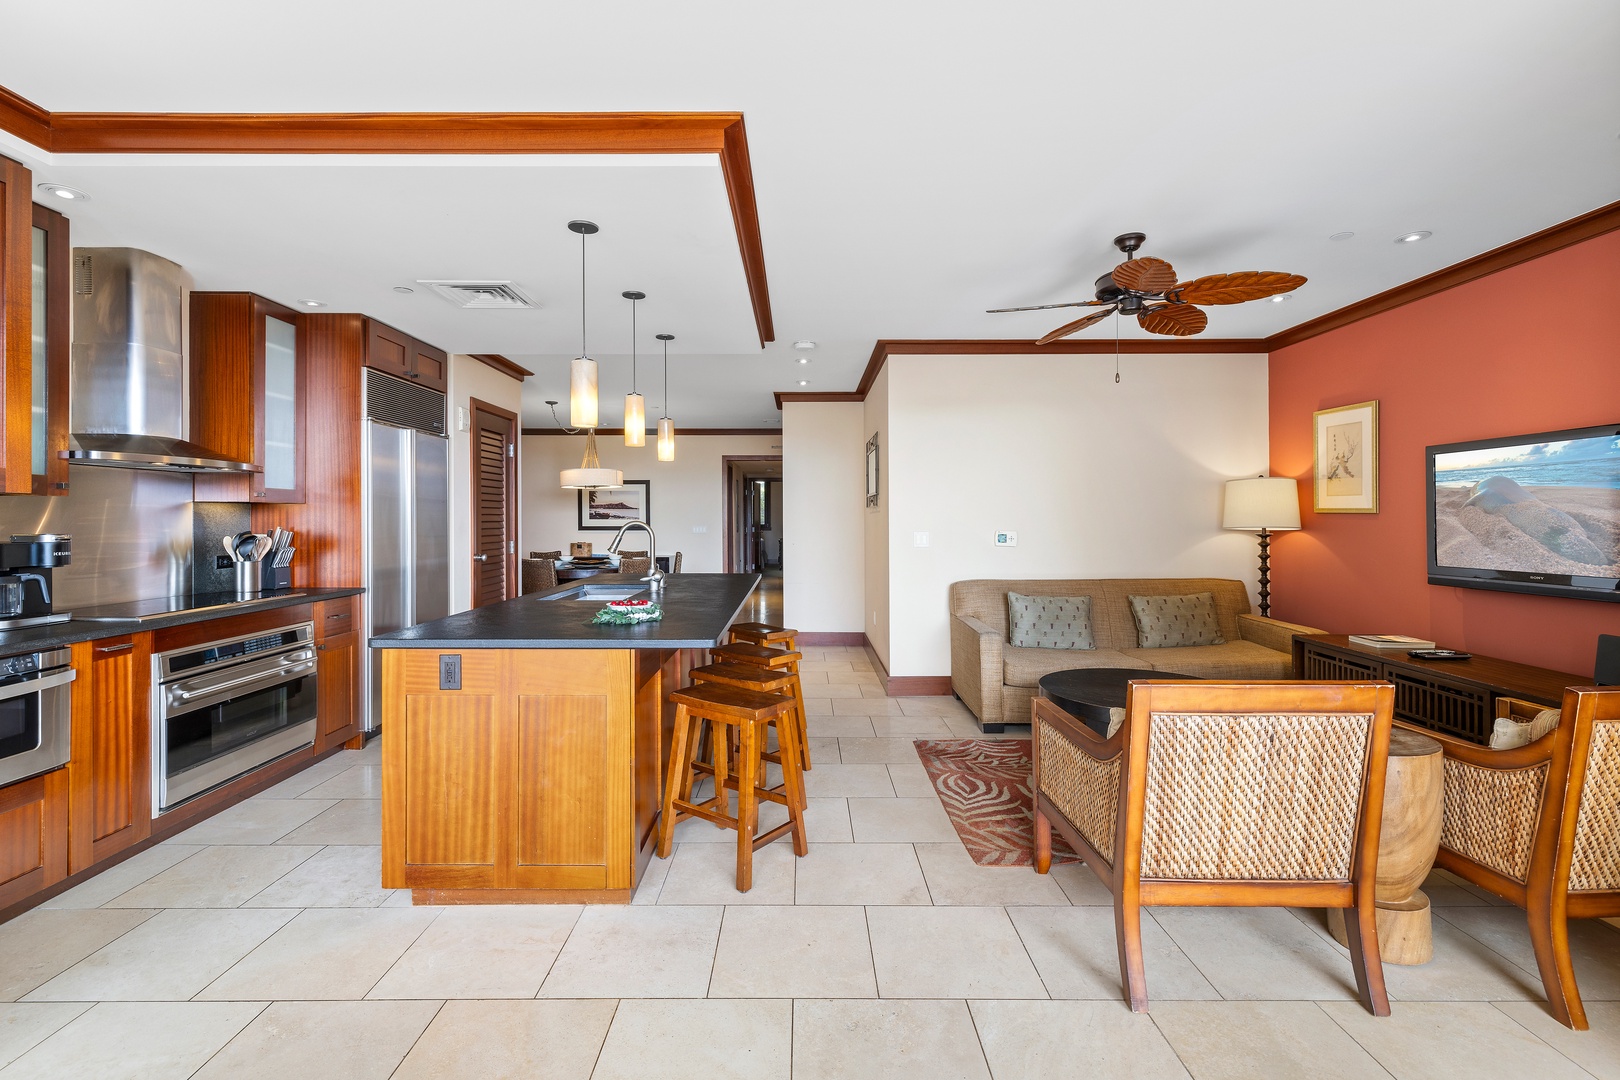 Kapolei Vacation Rentals, Ko Olina Beach Villas O402 - An open floor plan for visiting between the kitchen and dining area.